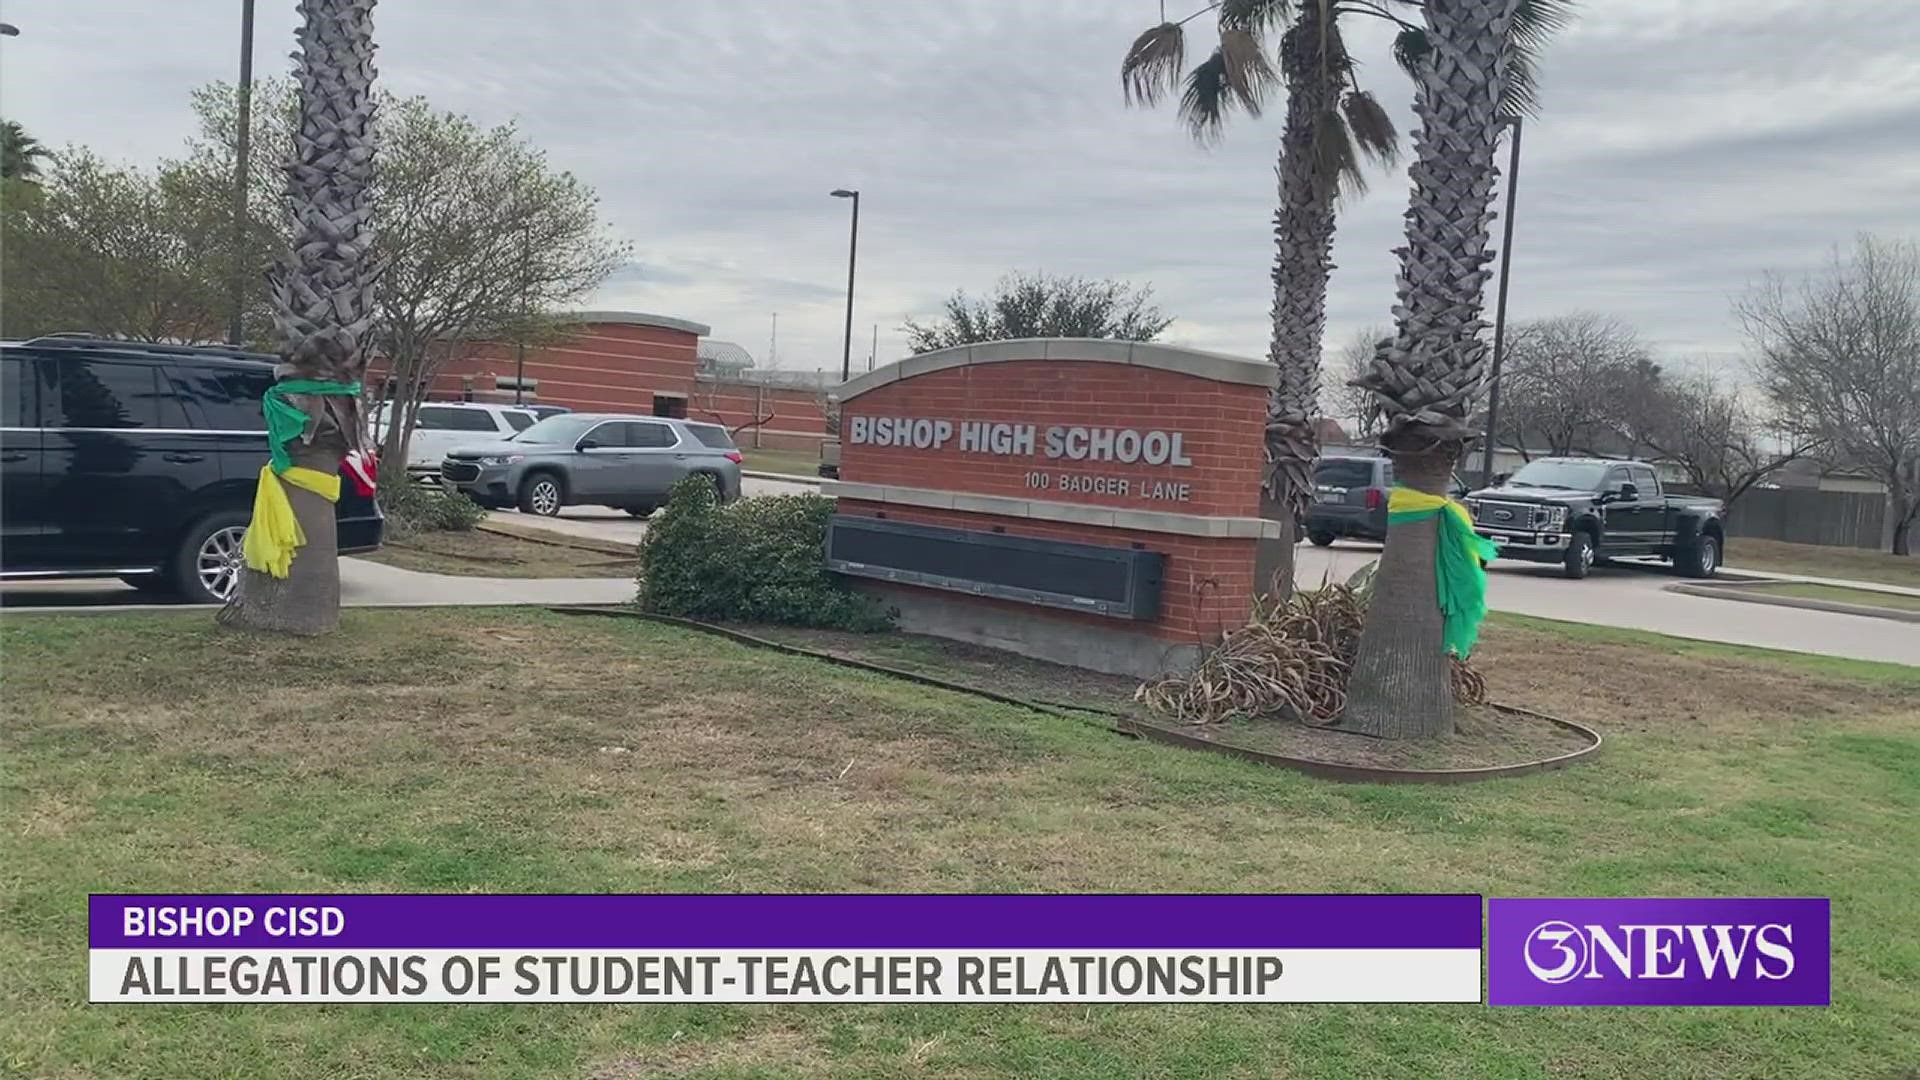 The teacher was immediately placed on administrative leave after the allegations came to light and resigned soon after, BPD said in a statement.